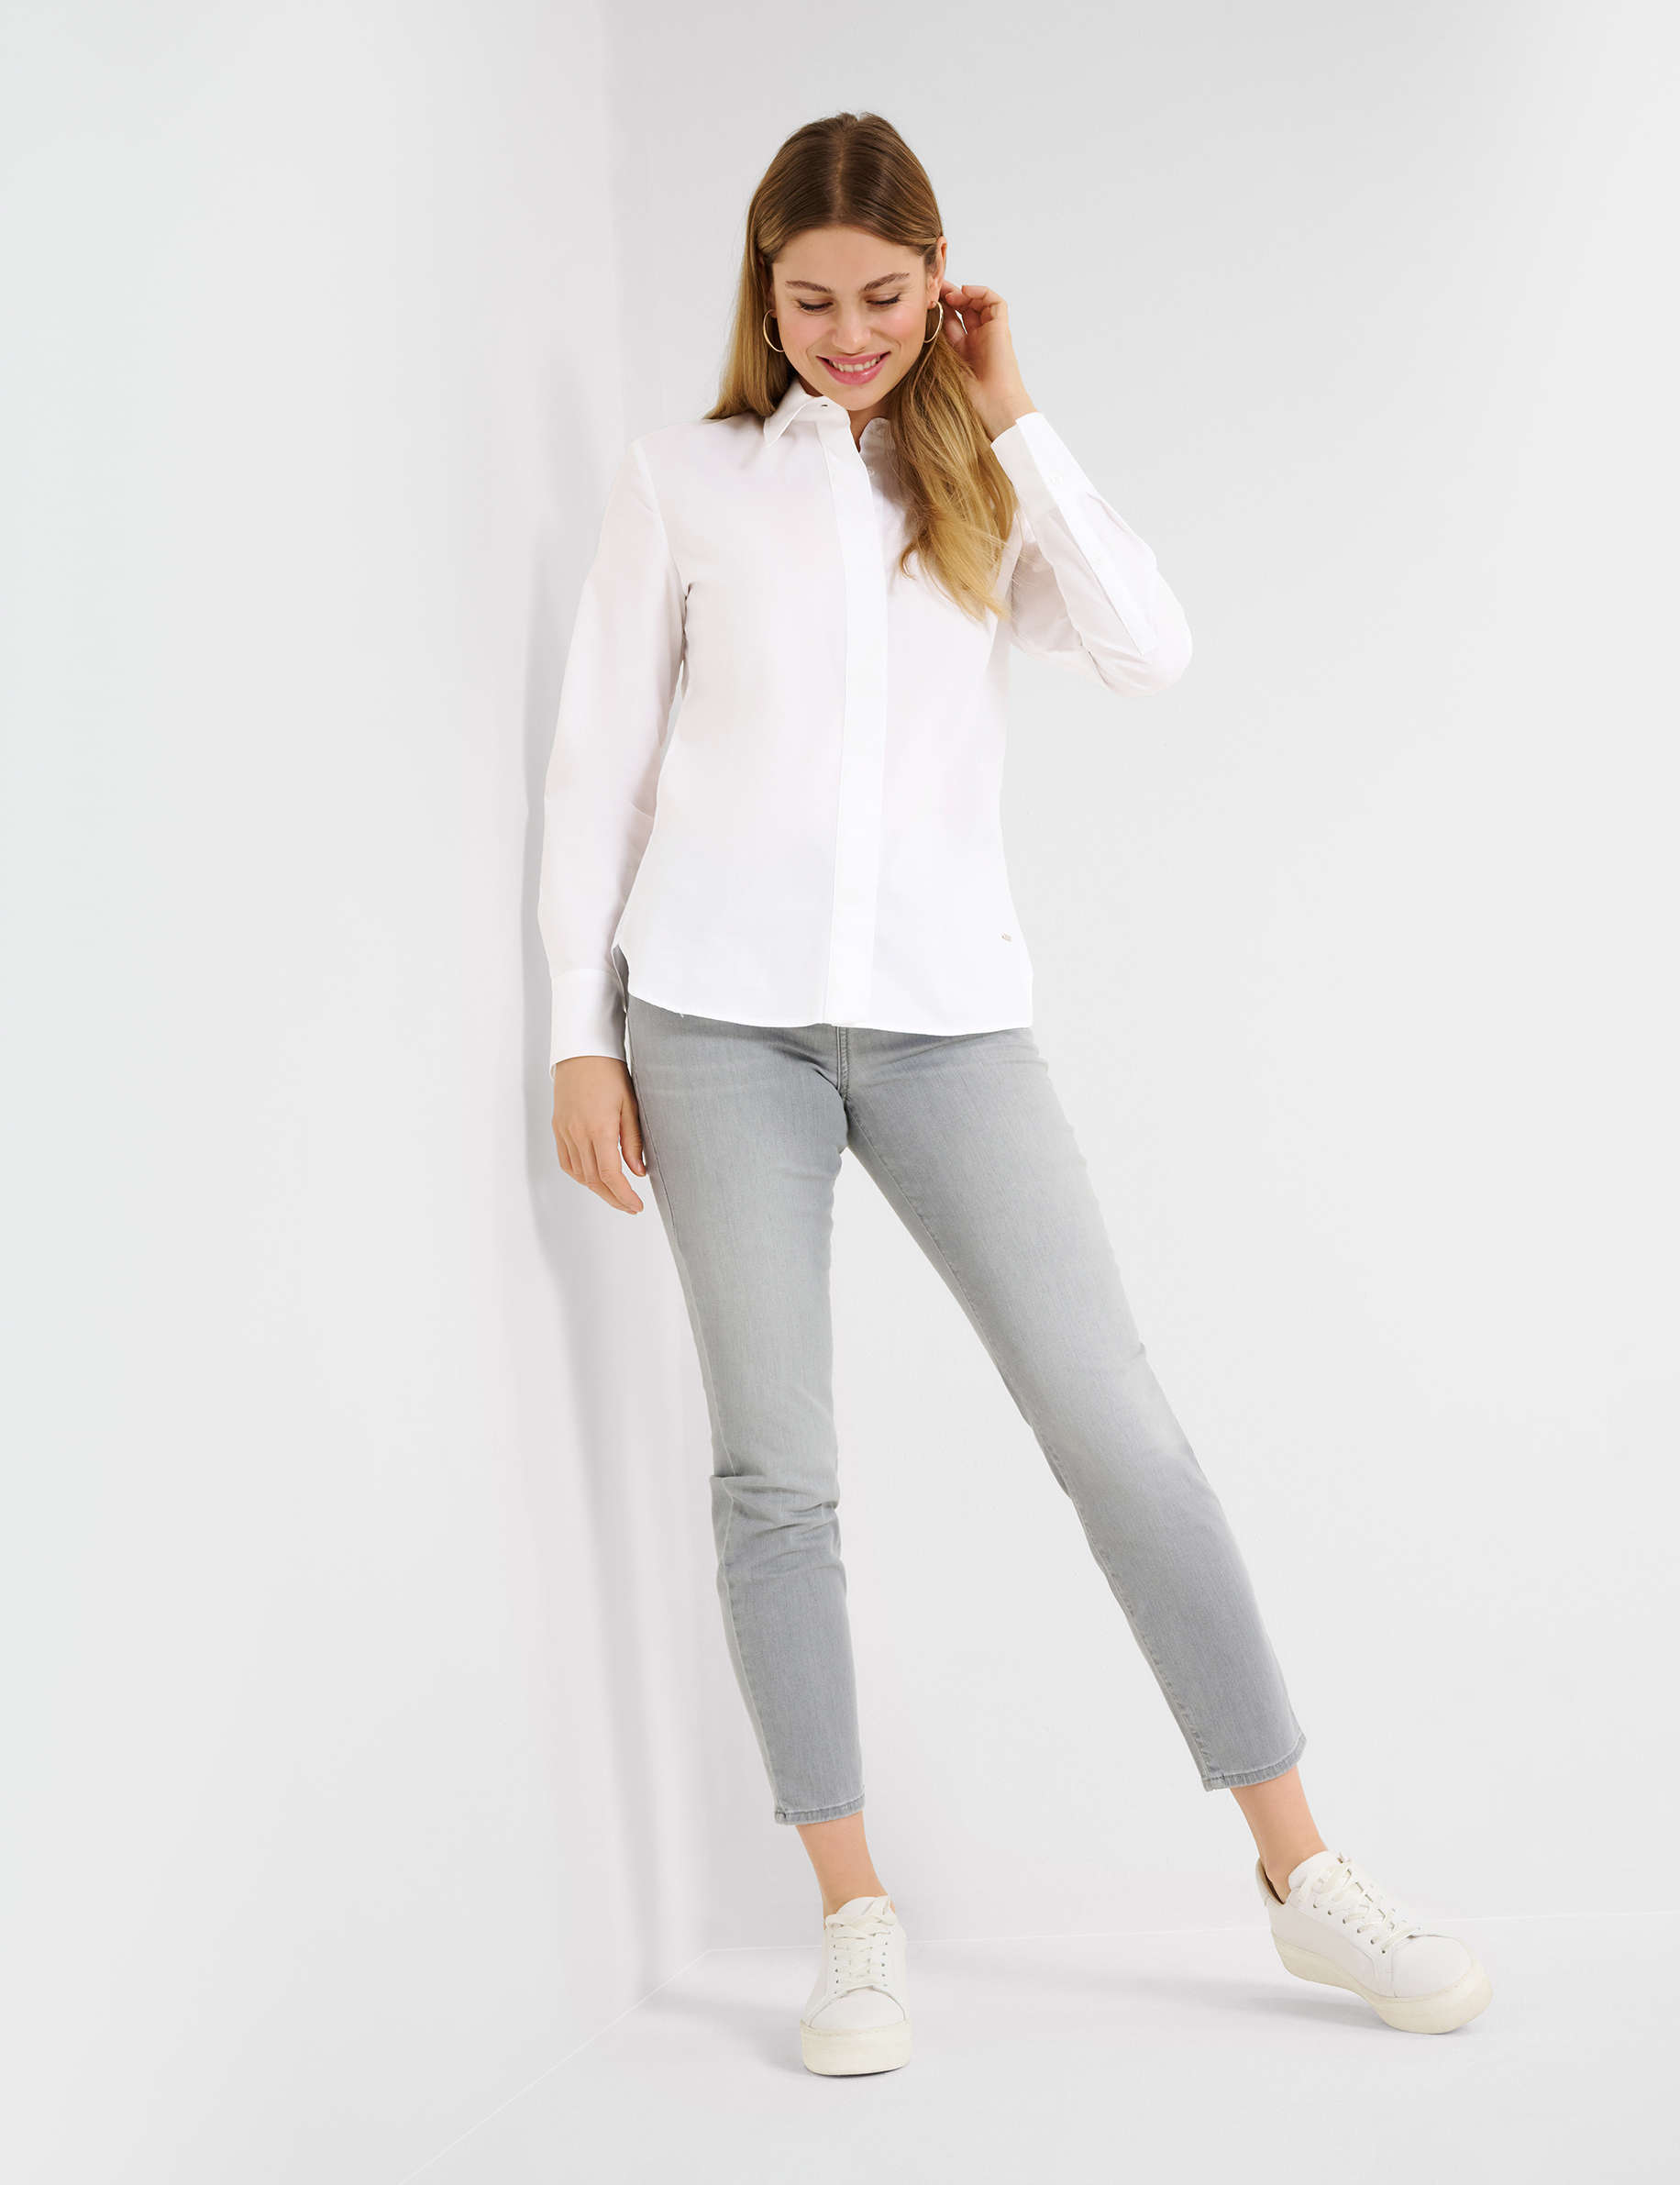 Women Style SHAKIRA S USED GREY Slim Fit Model Outfit